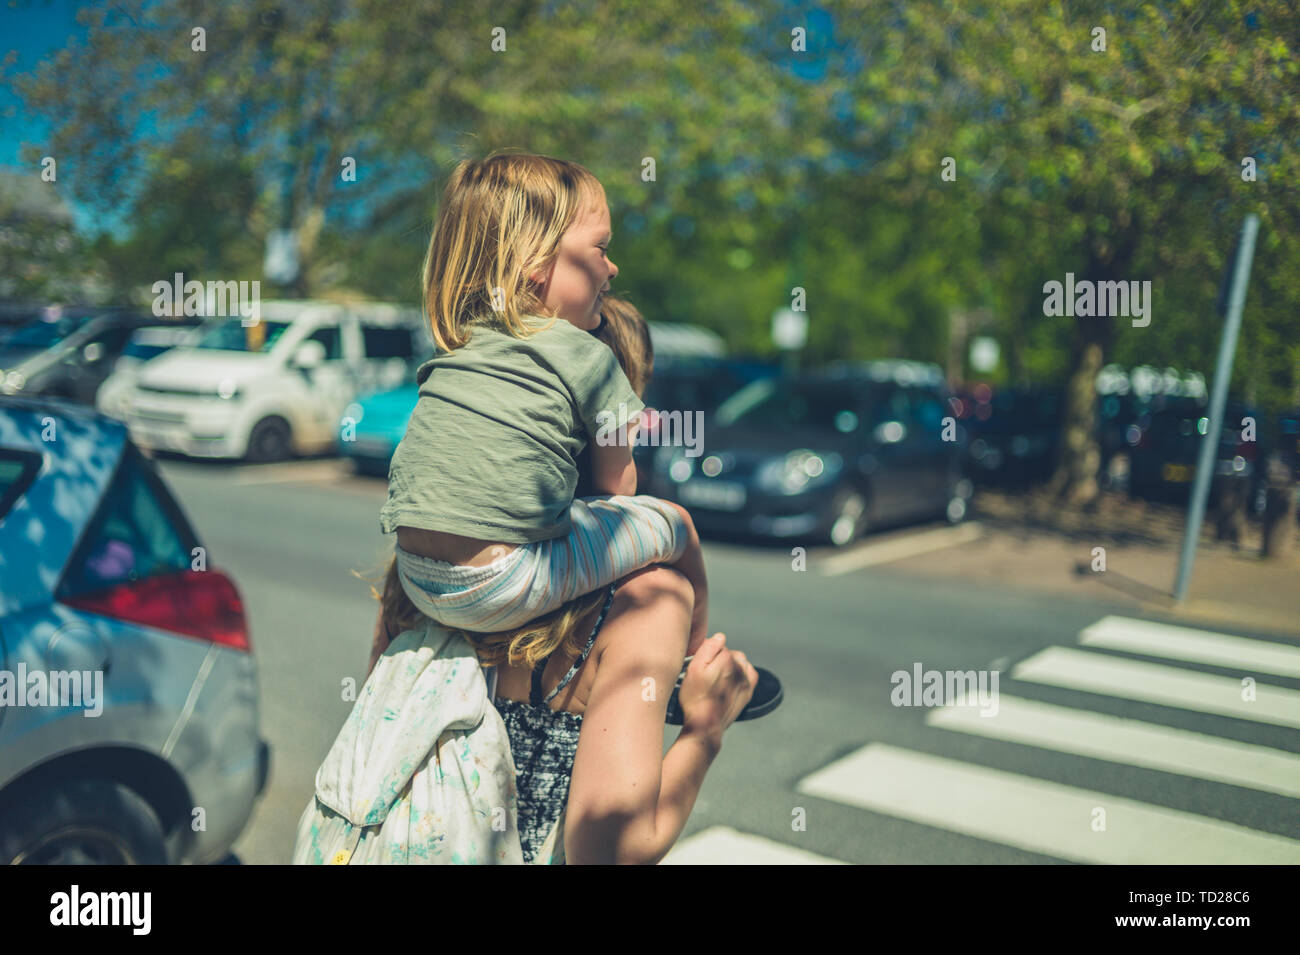 A little toddler is riding on his mother's shoulders in a car park on a sunnny summer day Stock Photo